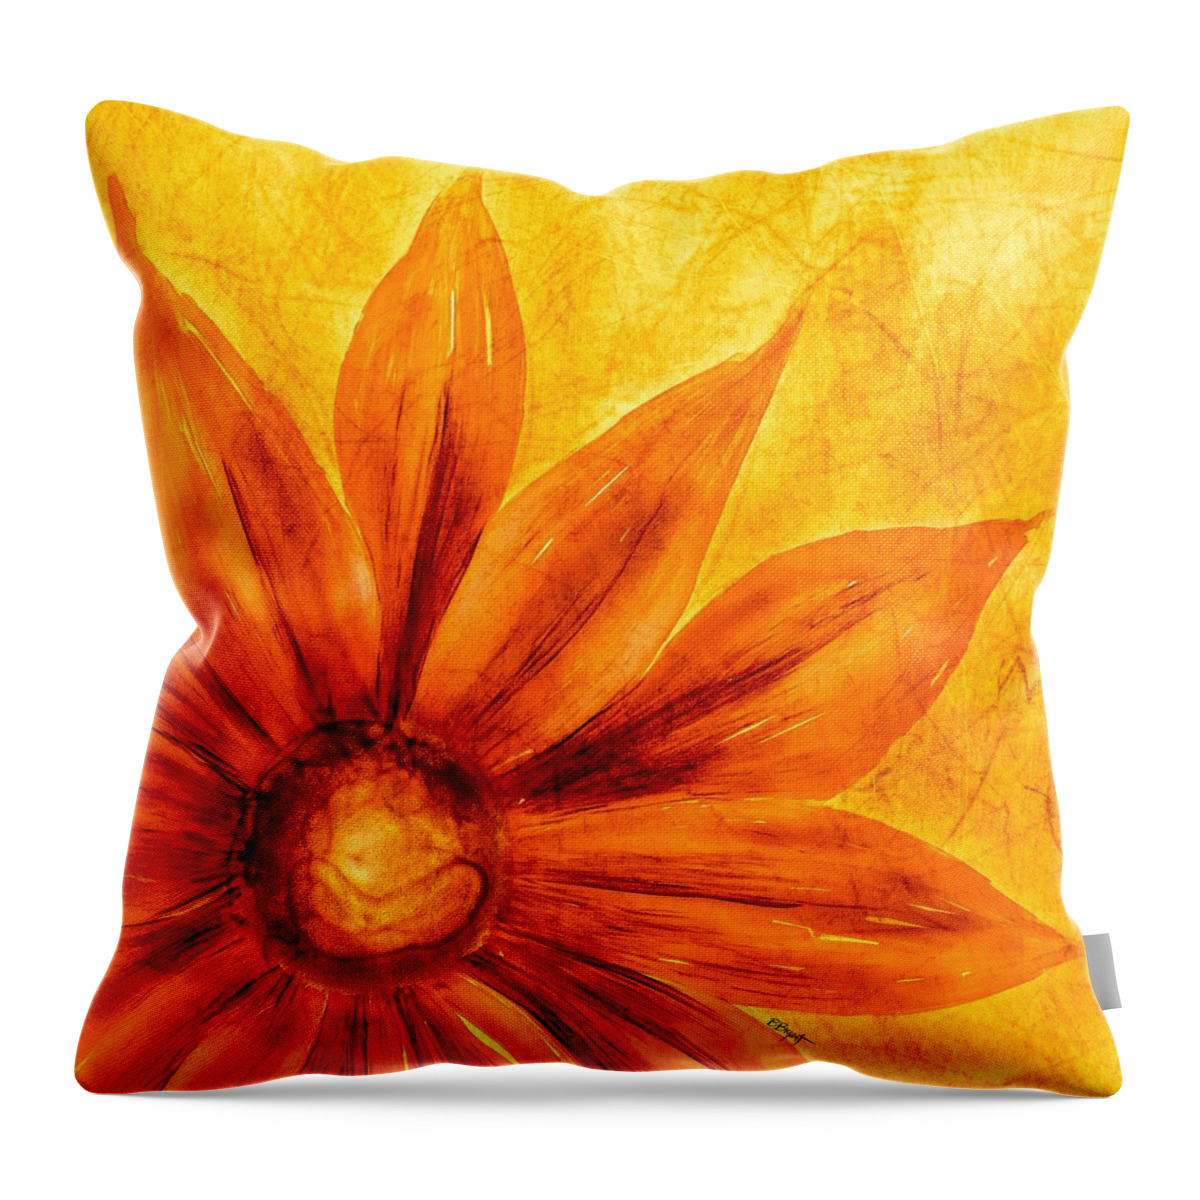 Flower Throw Pillow featuring the painting Happy Petals by Brenda Bryant